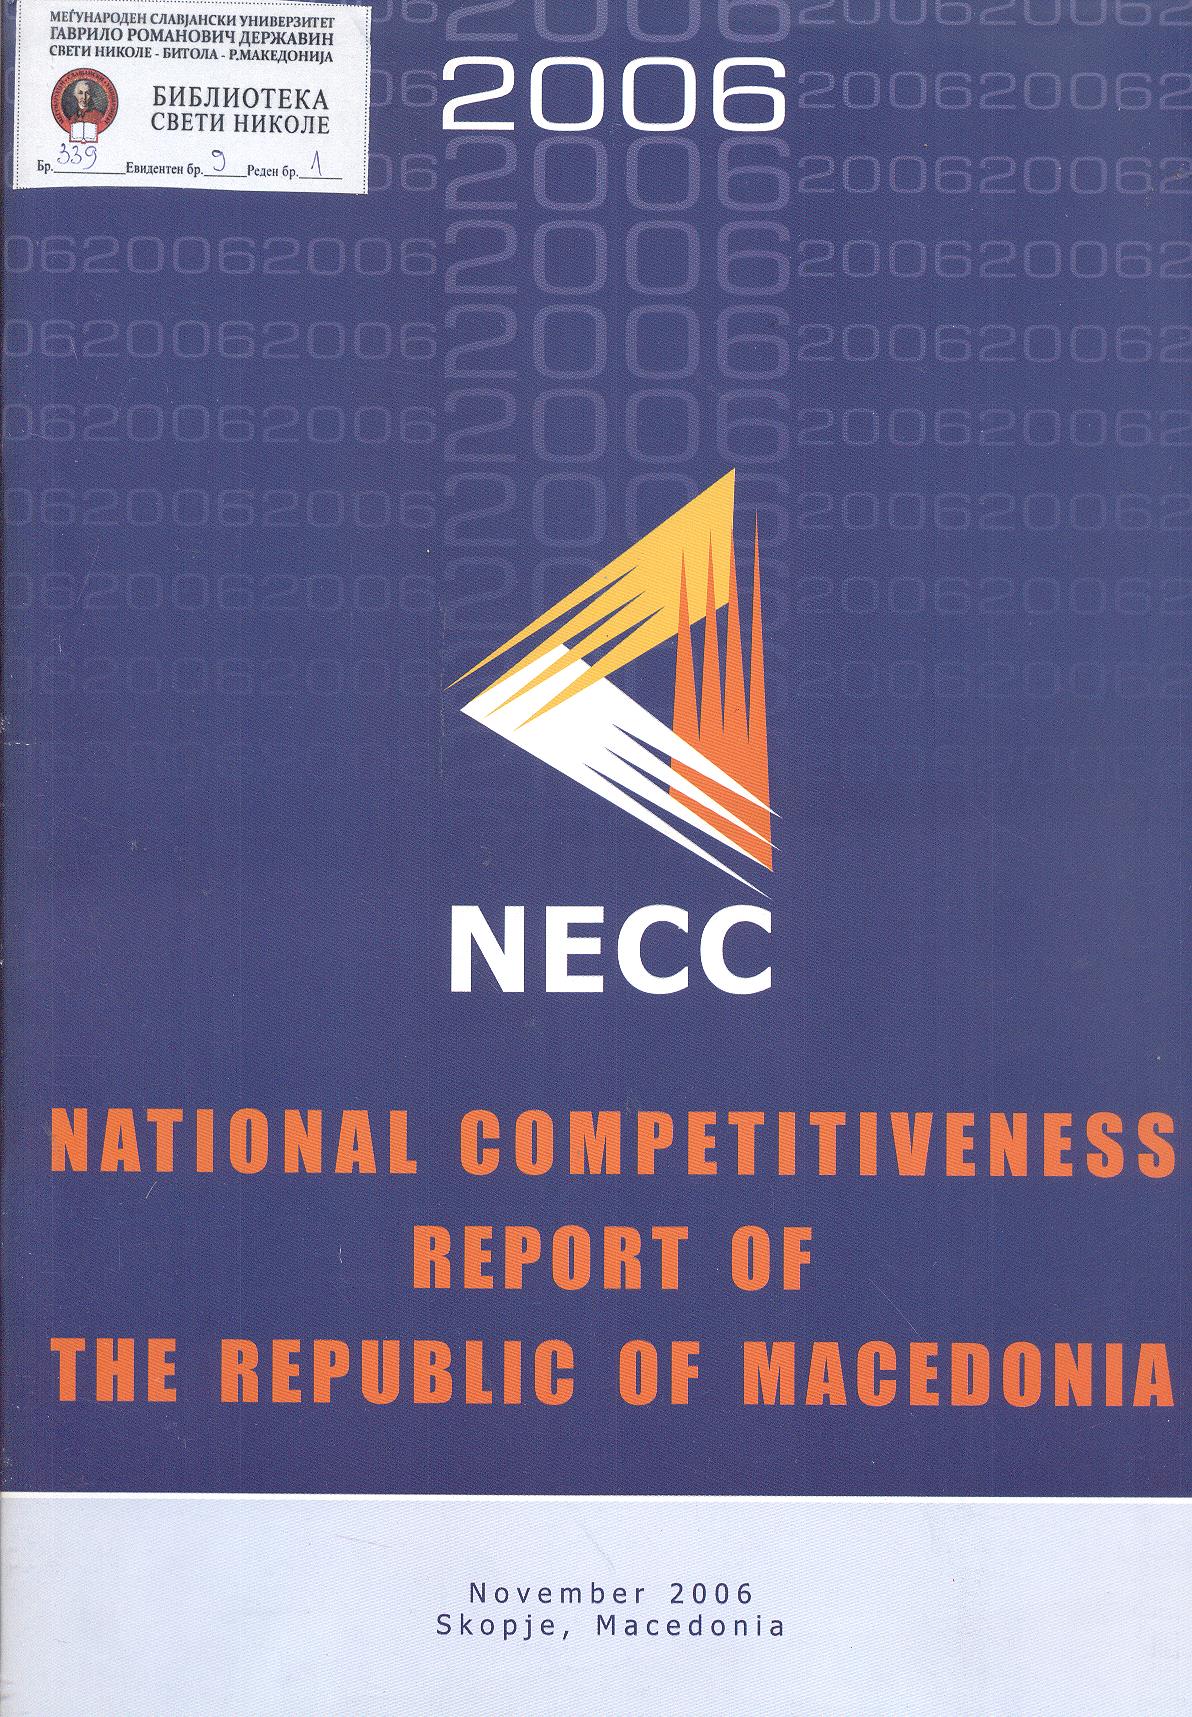 National competitiveness report of the Republic of Macedonia